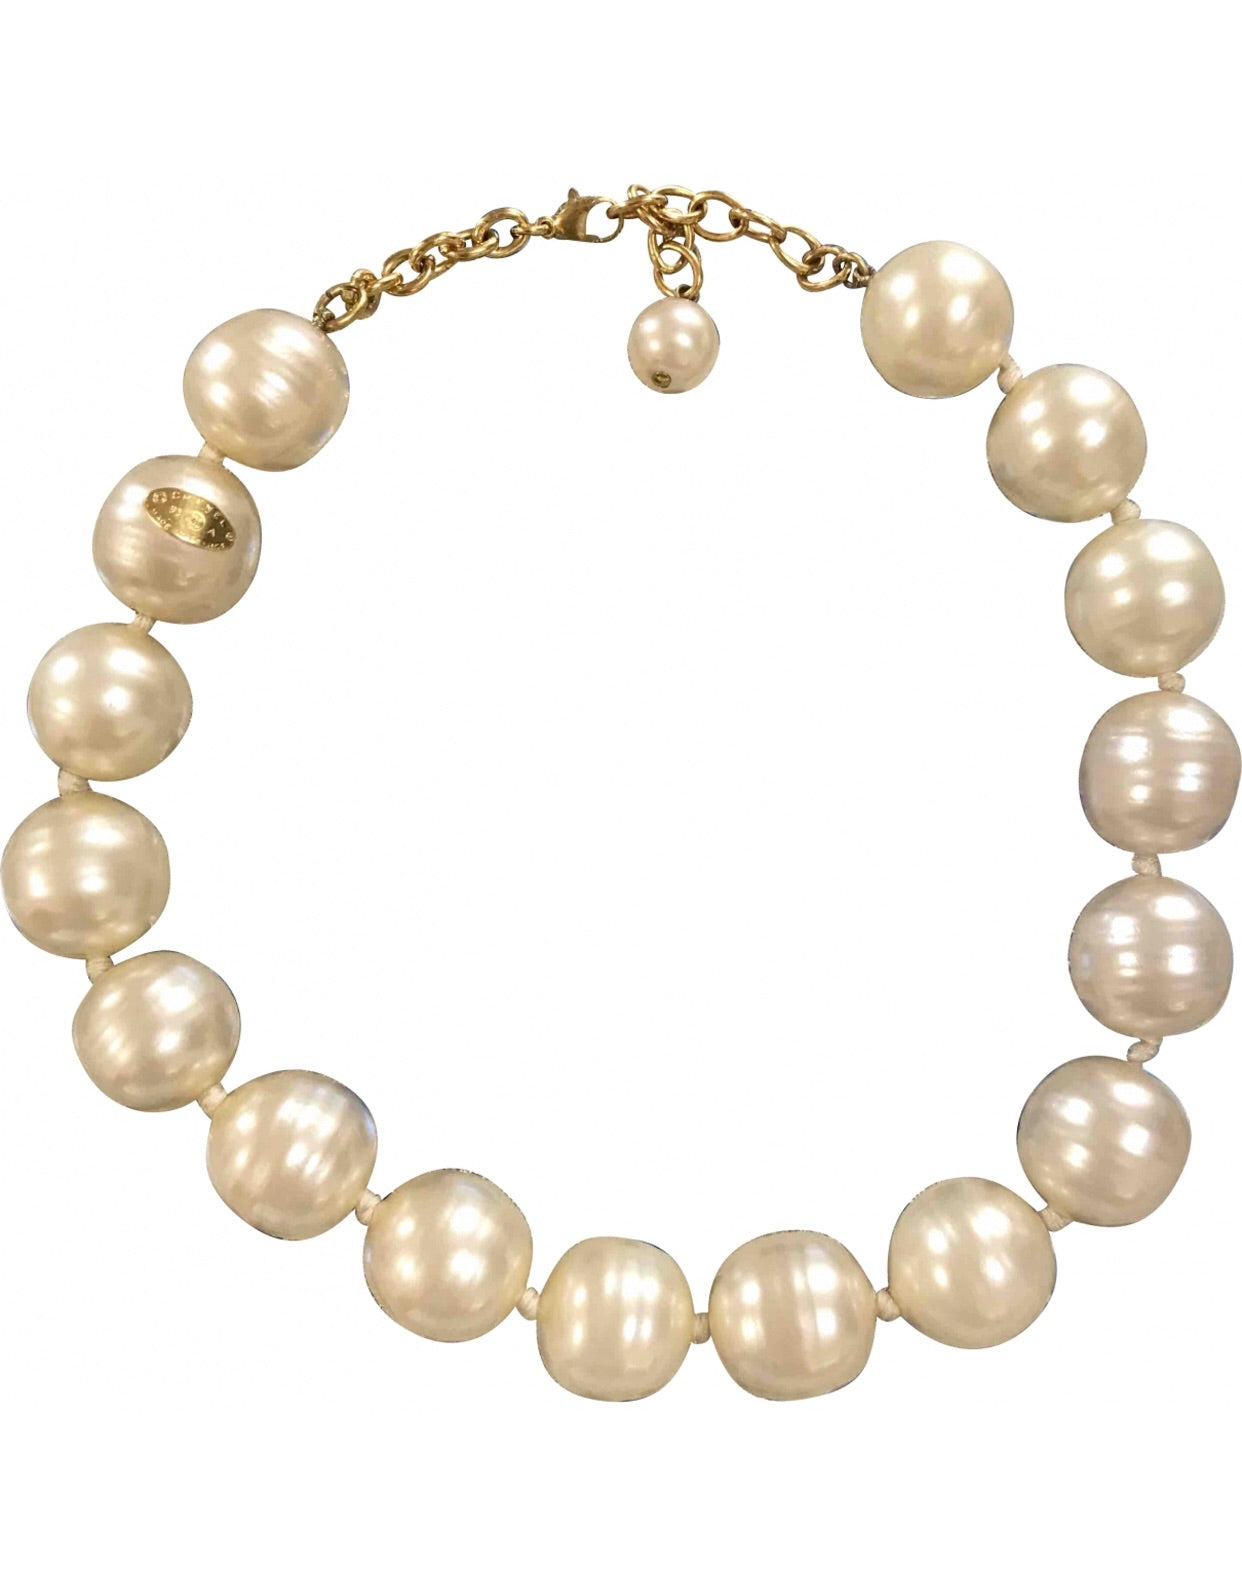 Sold at Auction: Chanel Faux-Pearls Costume Linked Necklace